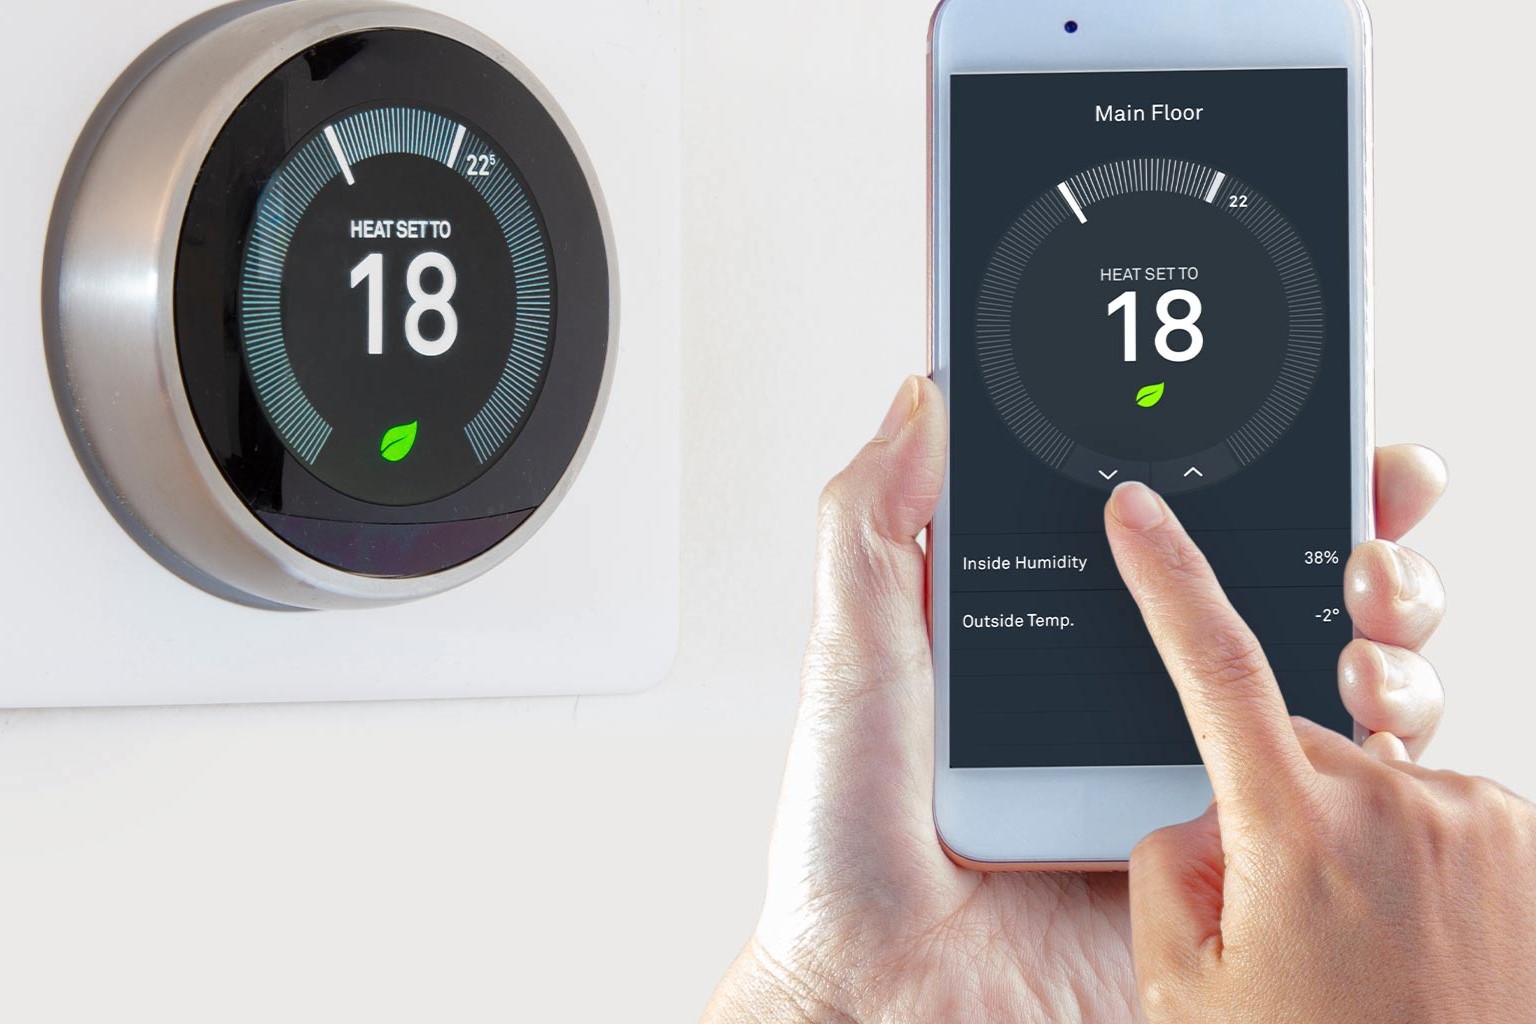 How Does The Google Nest Thermostat Work?